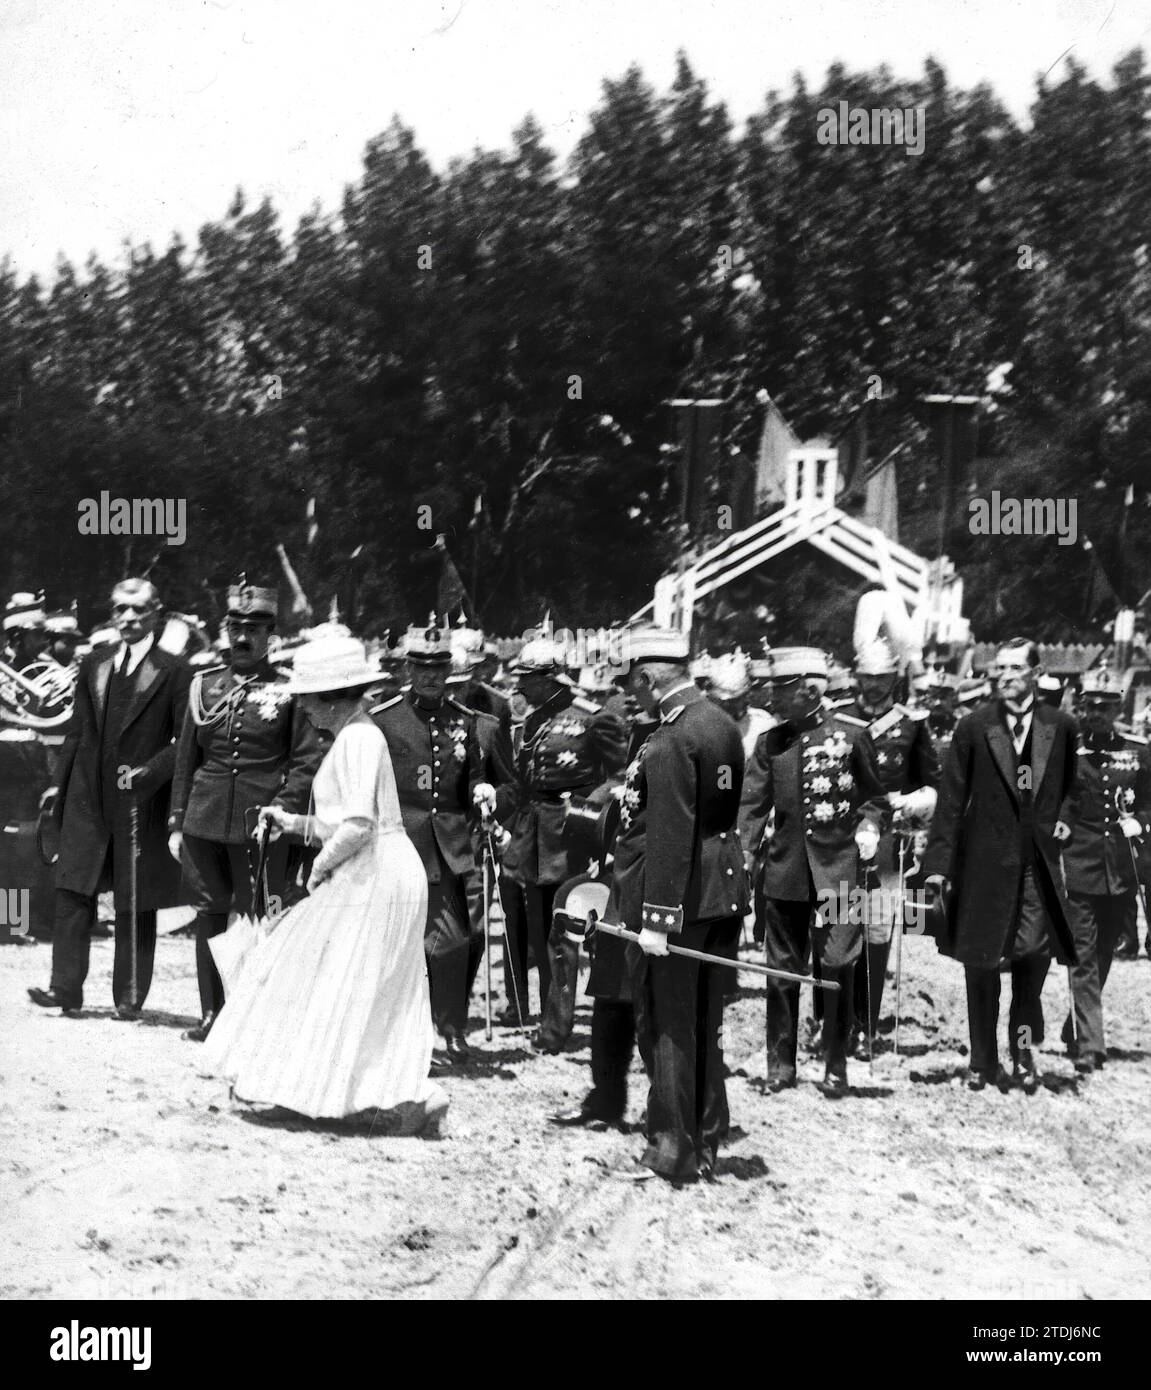 05/28/1920. Madrid. A first Stone. HM Queen Victoria Eugenia, Heading to lay the first stone for an Engineer barracks that will be built on Moret Street. Credit: Album / Archivo ABC / Julio Duque Stock Photo